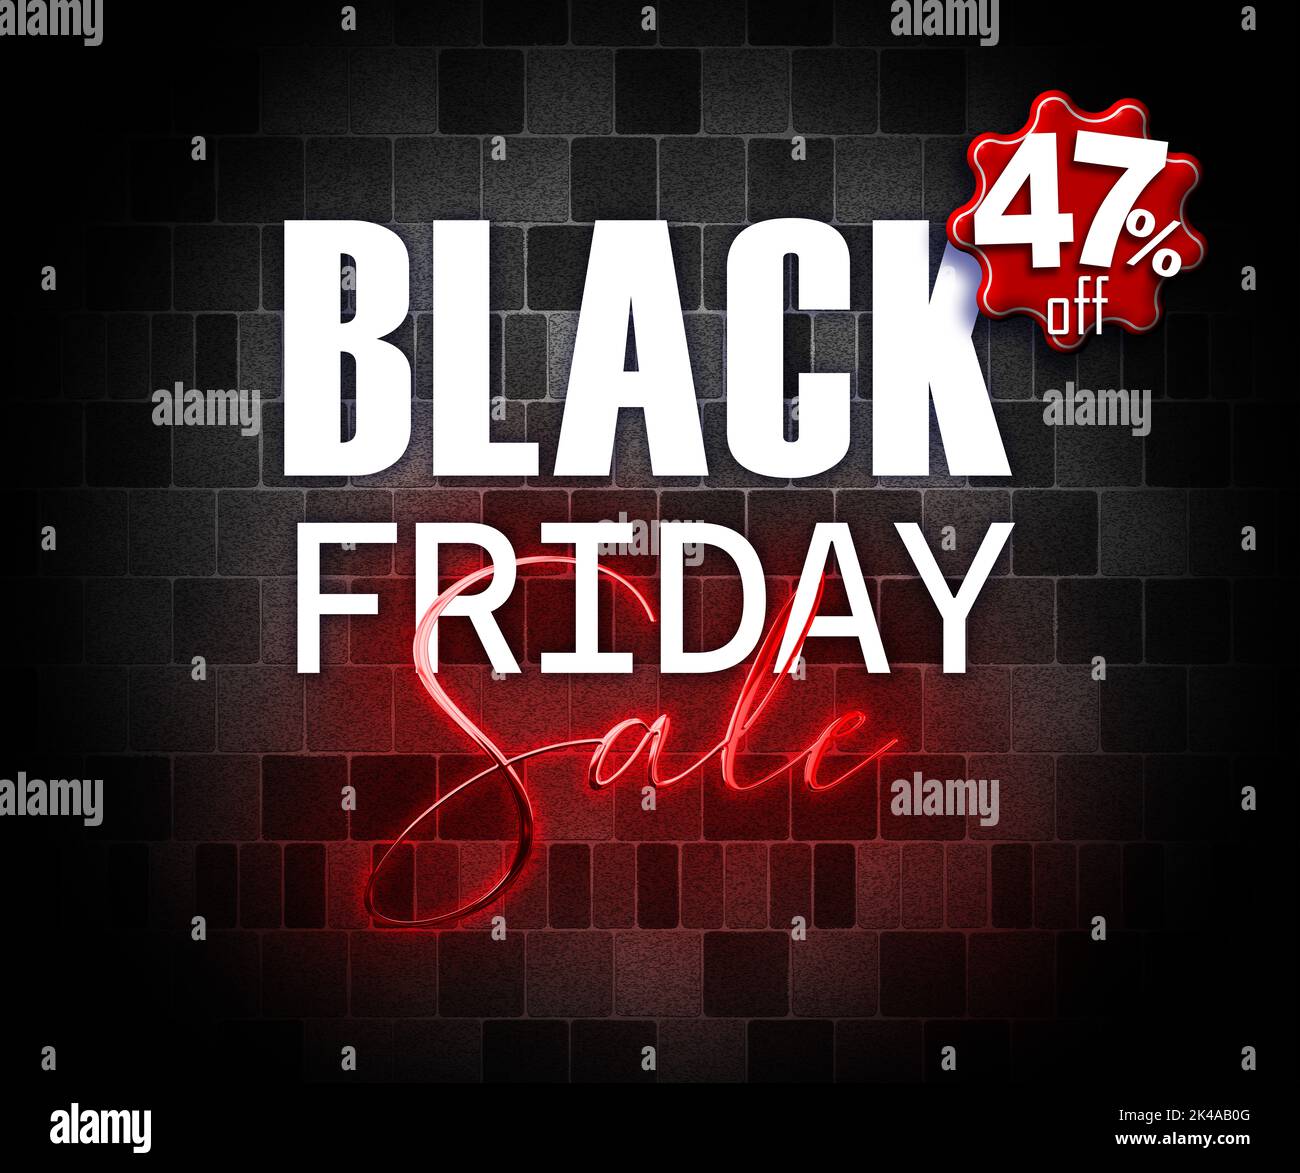 illustration with 3d elements black friday promotion banner 47 percent off sales increase Stock Photo